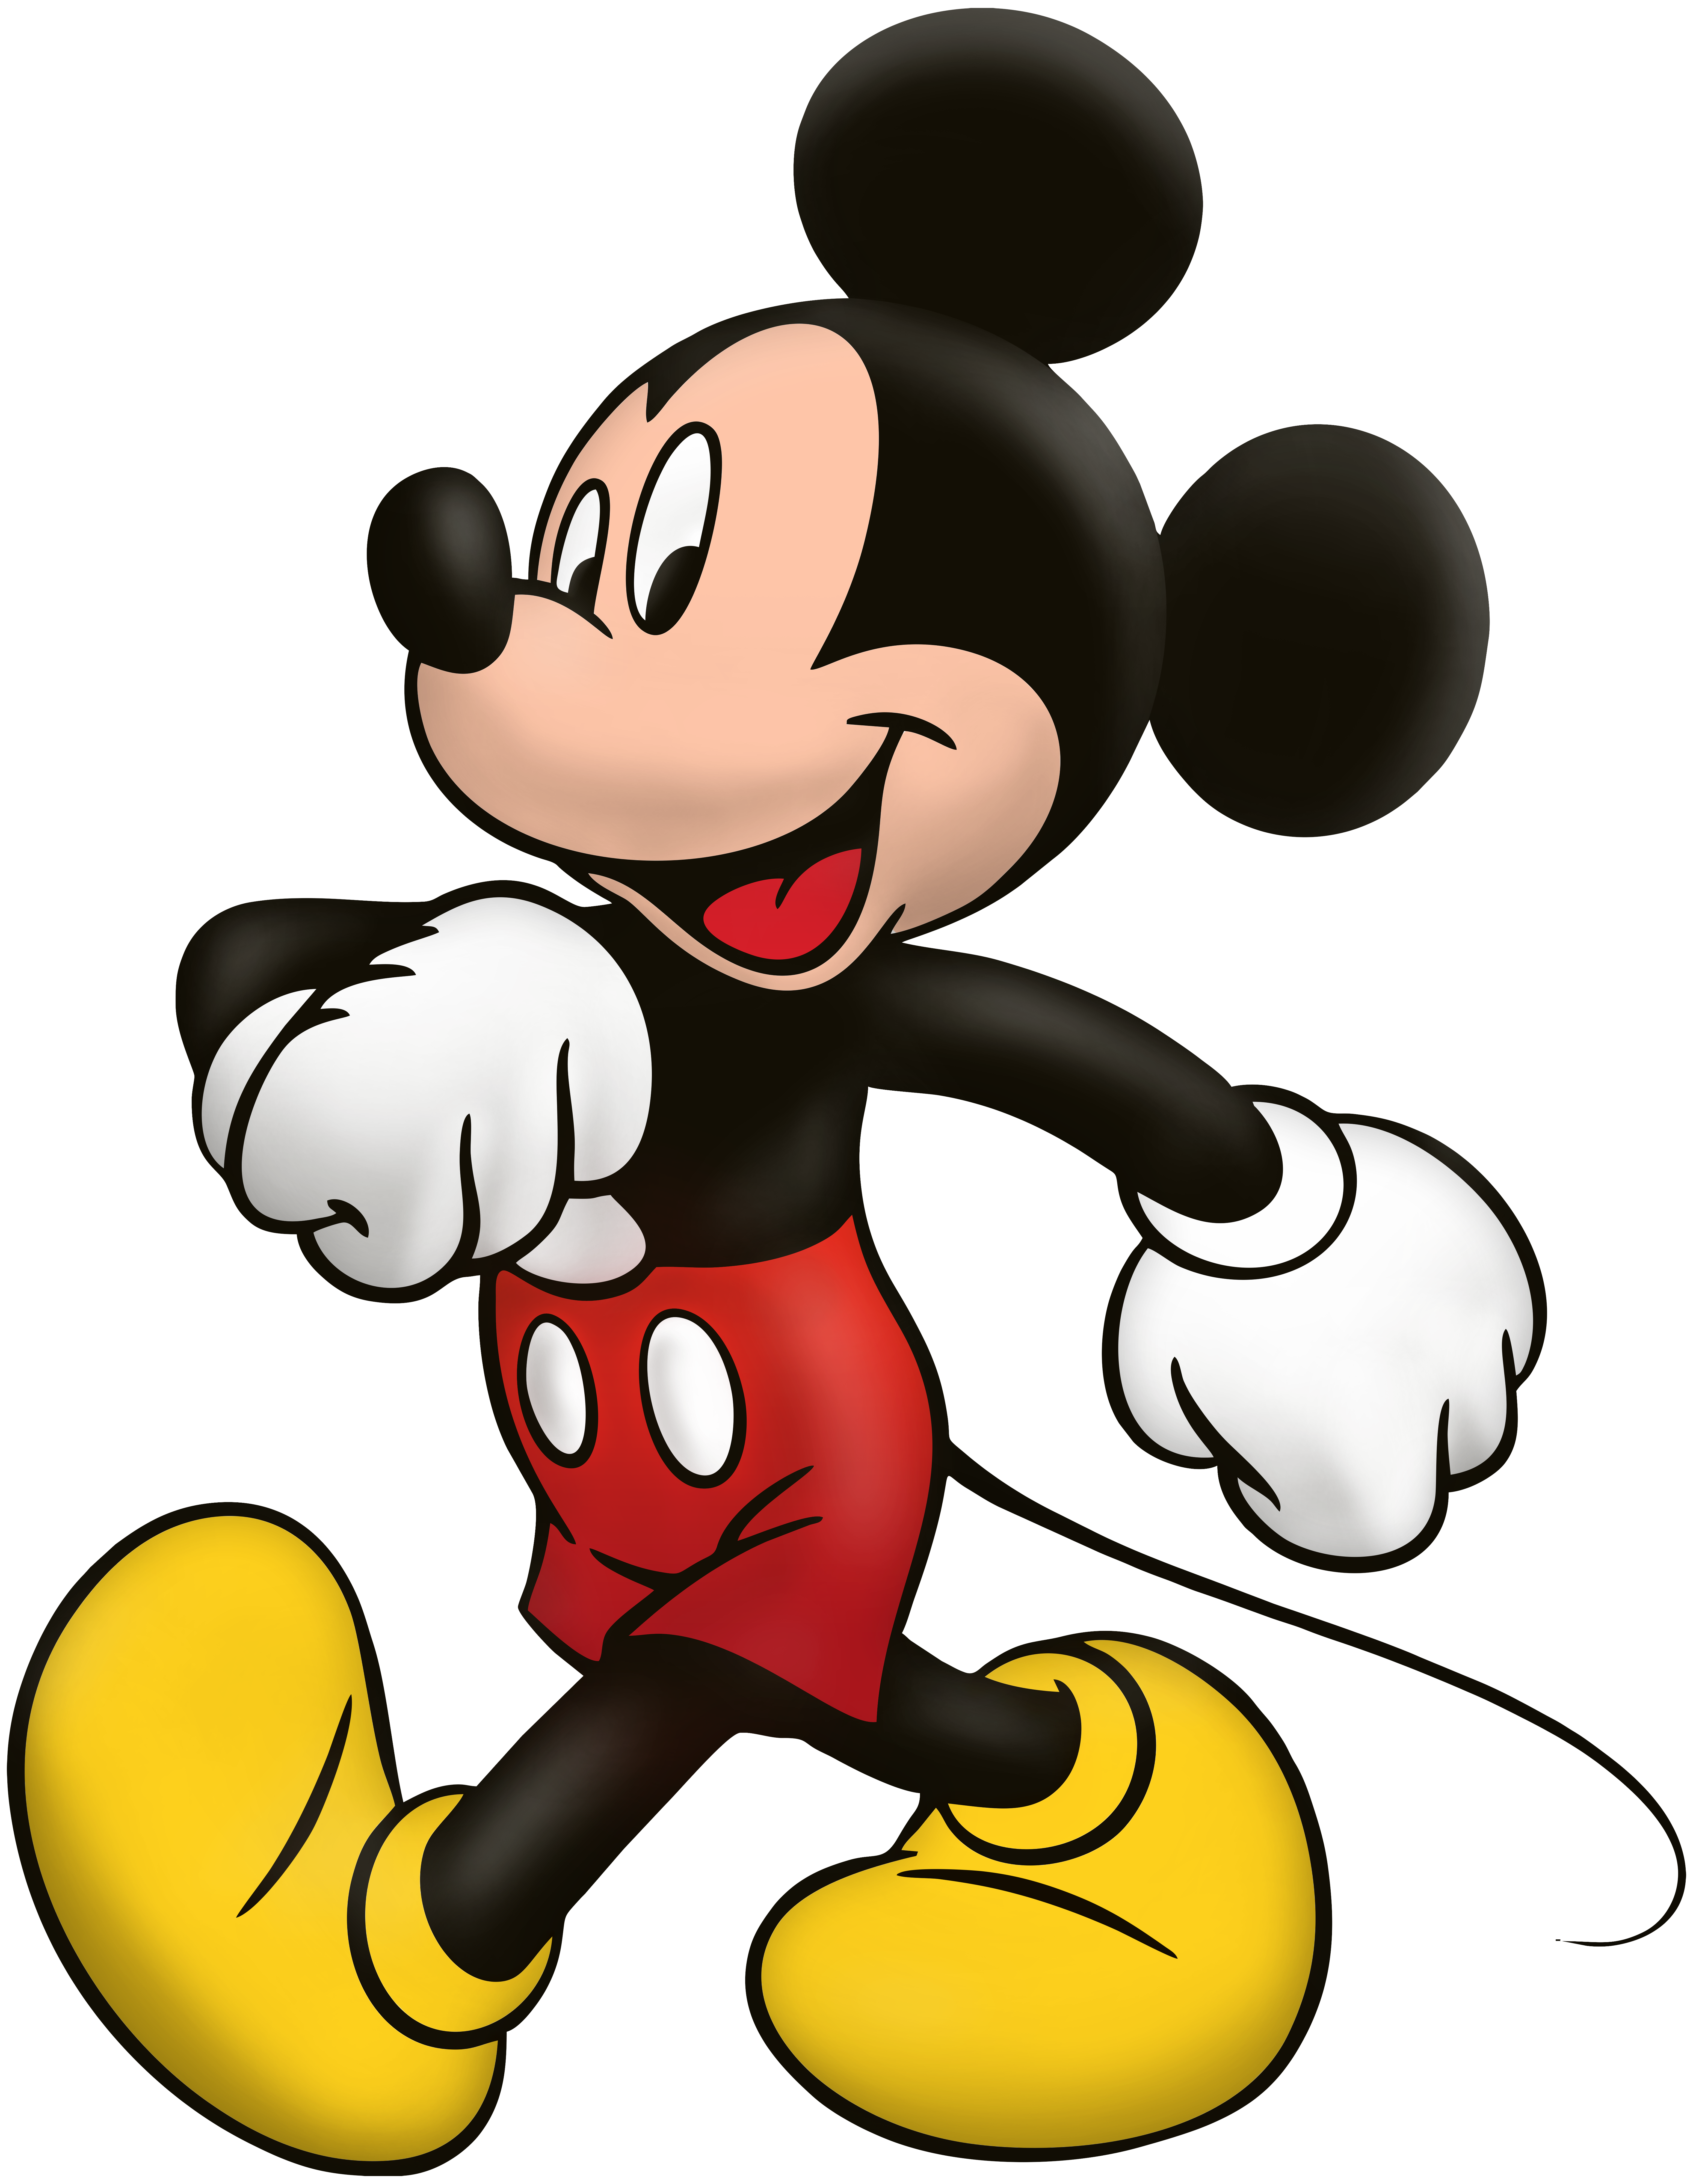 Mickey Mouse PNG Cartoon Image​-Quality Image and Transparent PNG Free C. Mickey mouse png, Mickey mouse drawings, Mickey mouse art